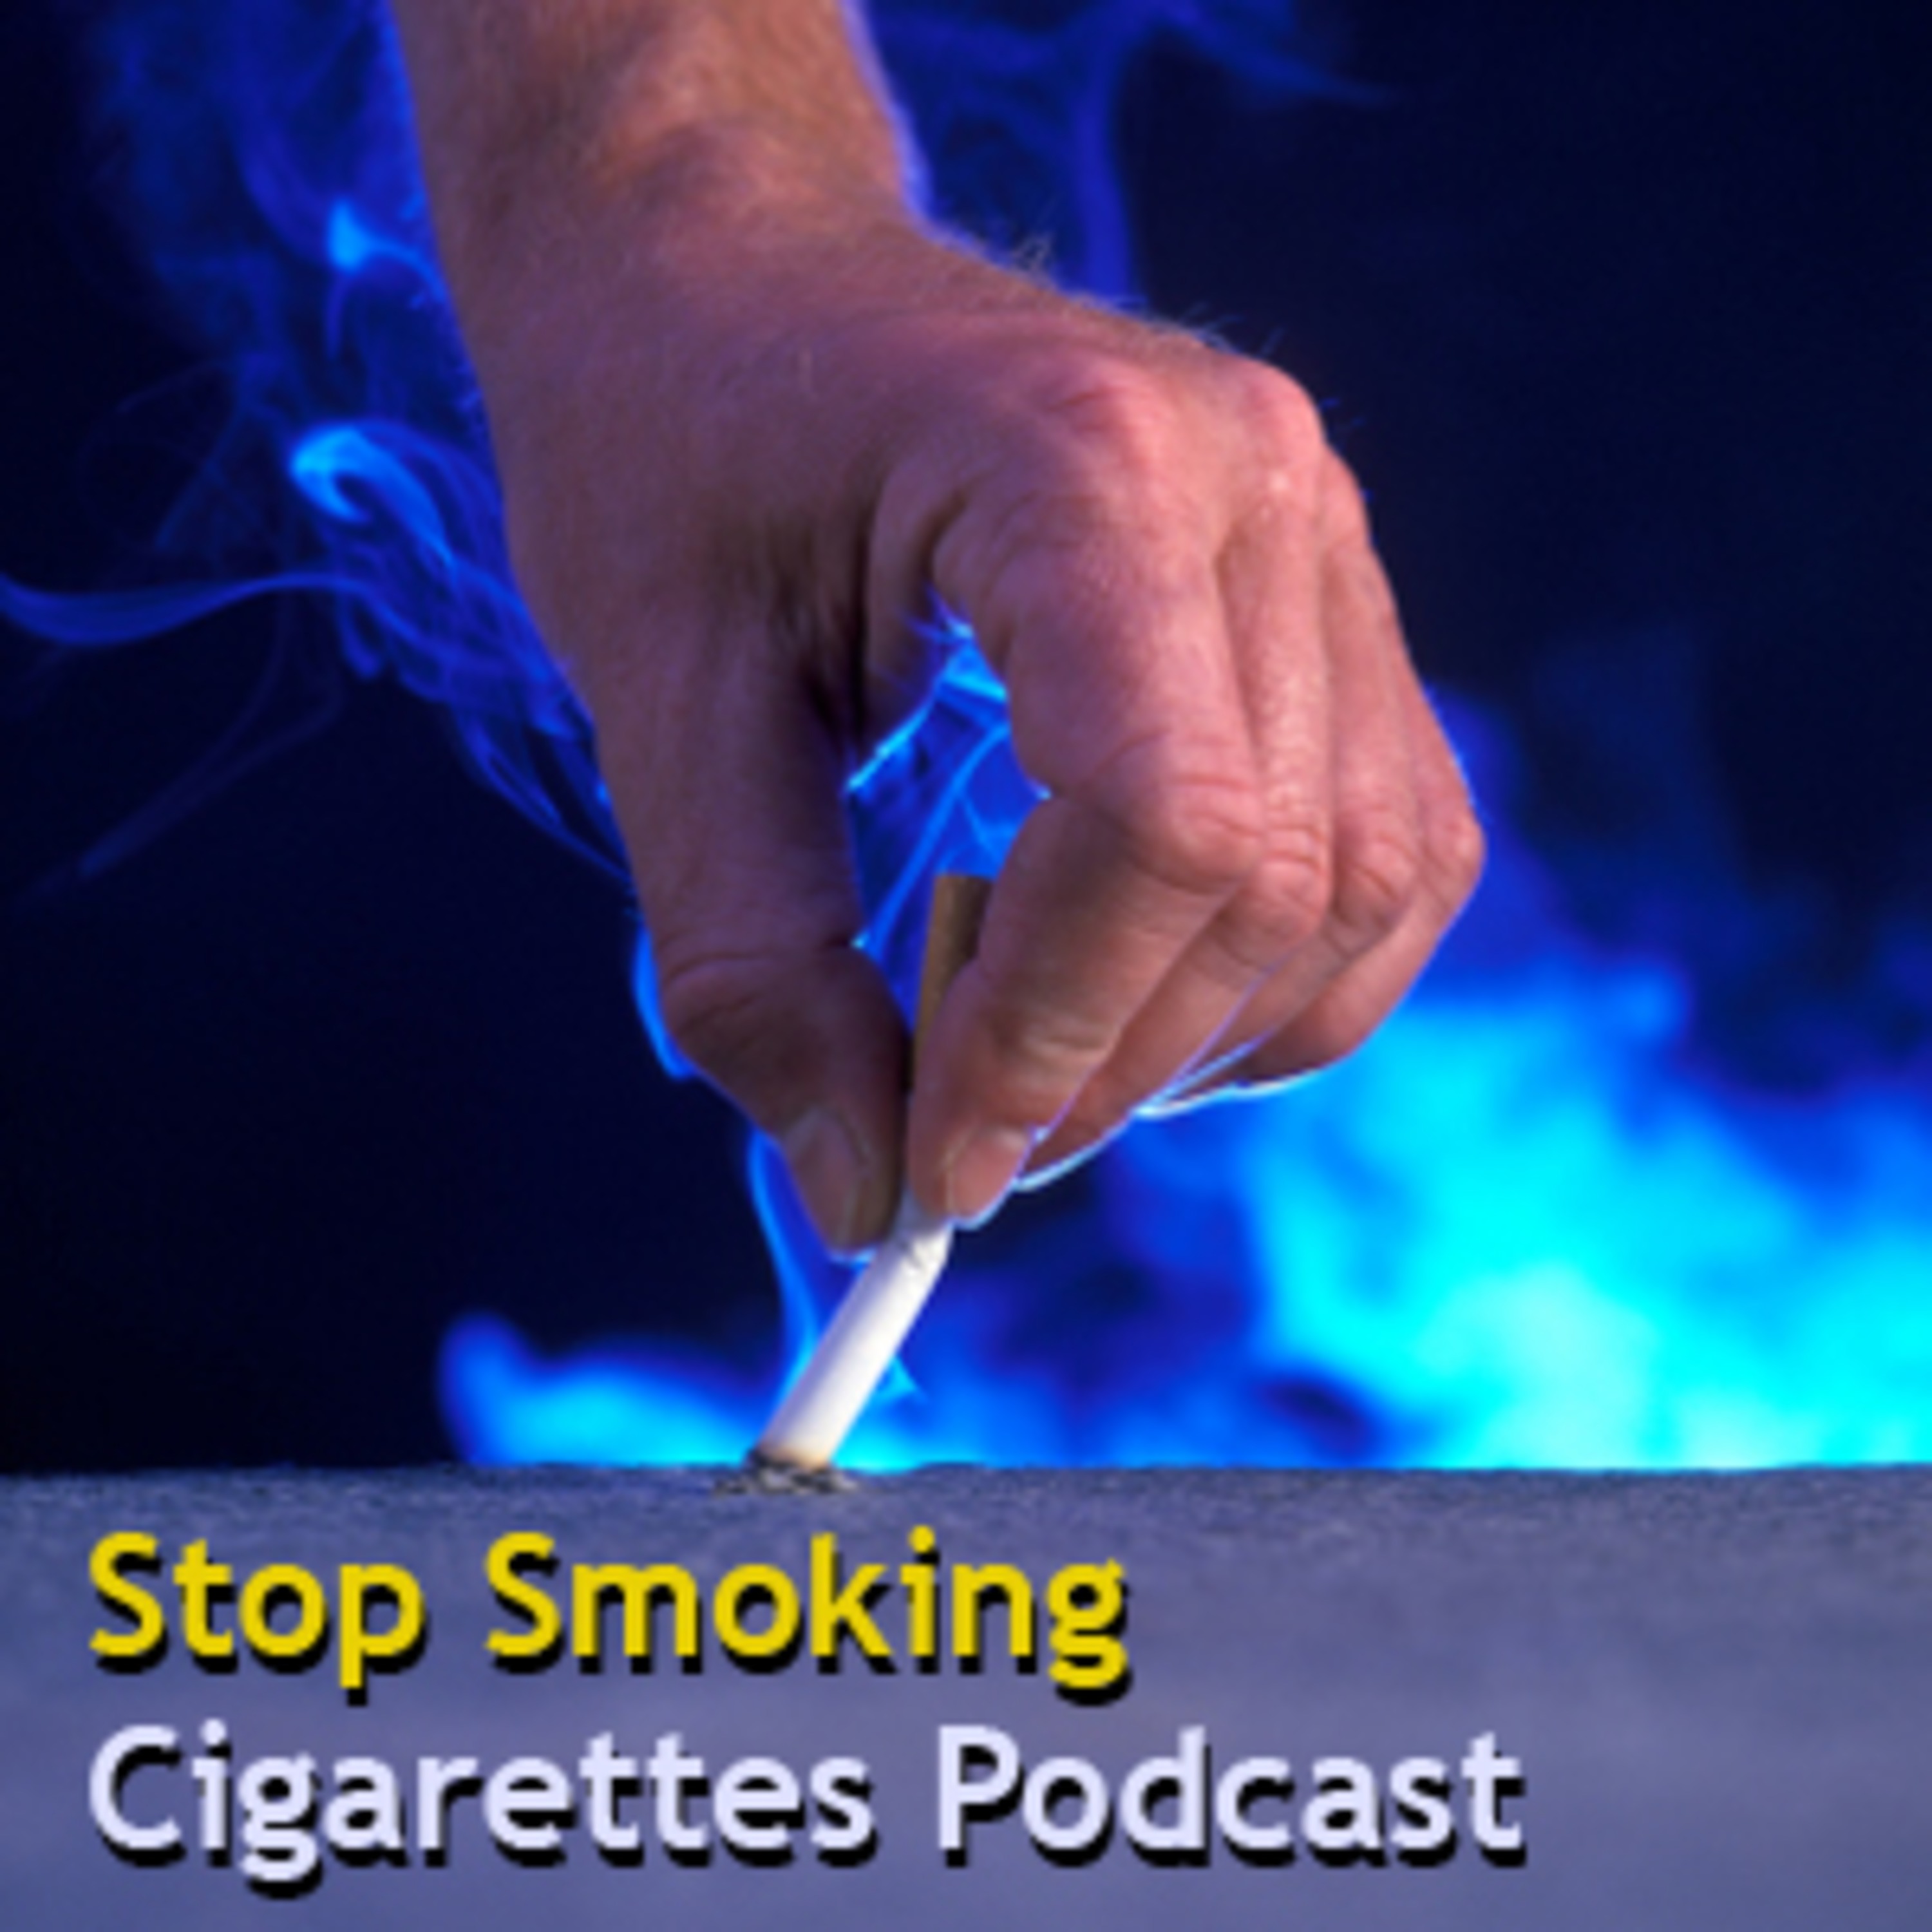 Introduction to Stop Smoking Cigarettes